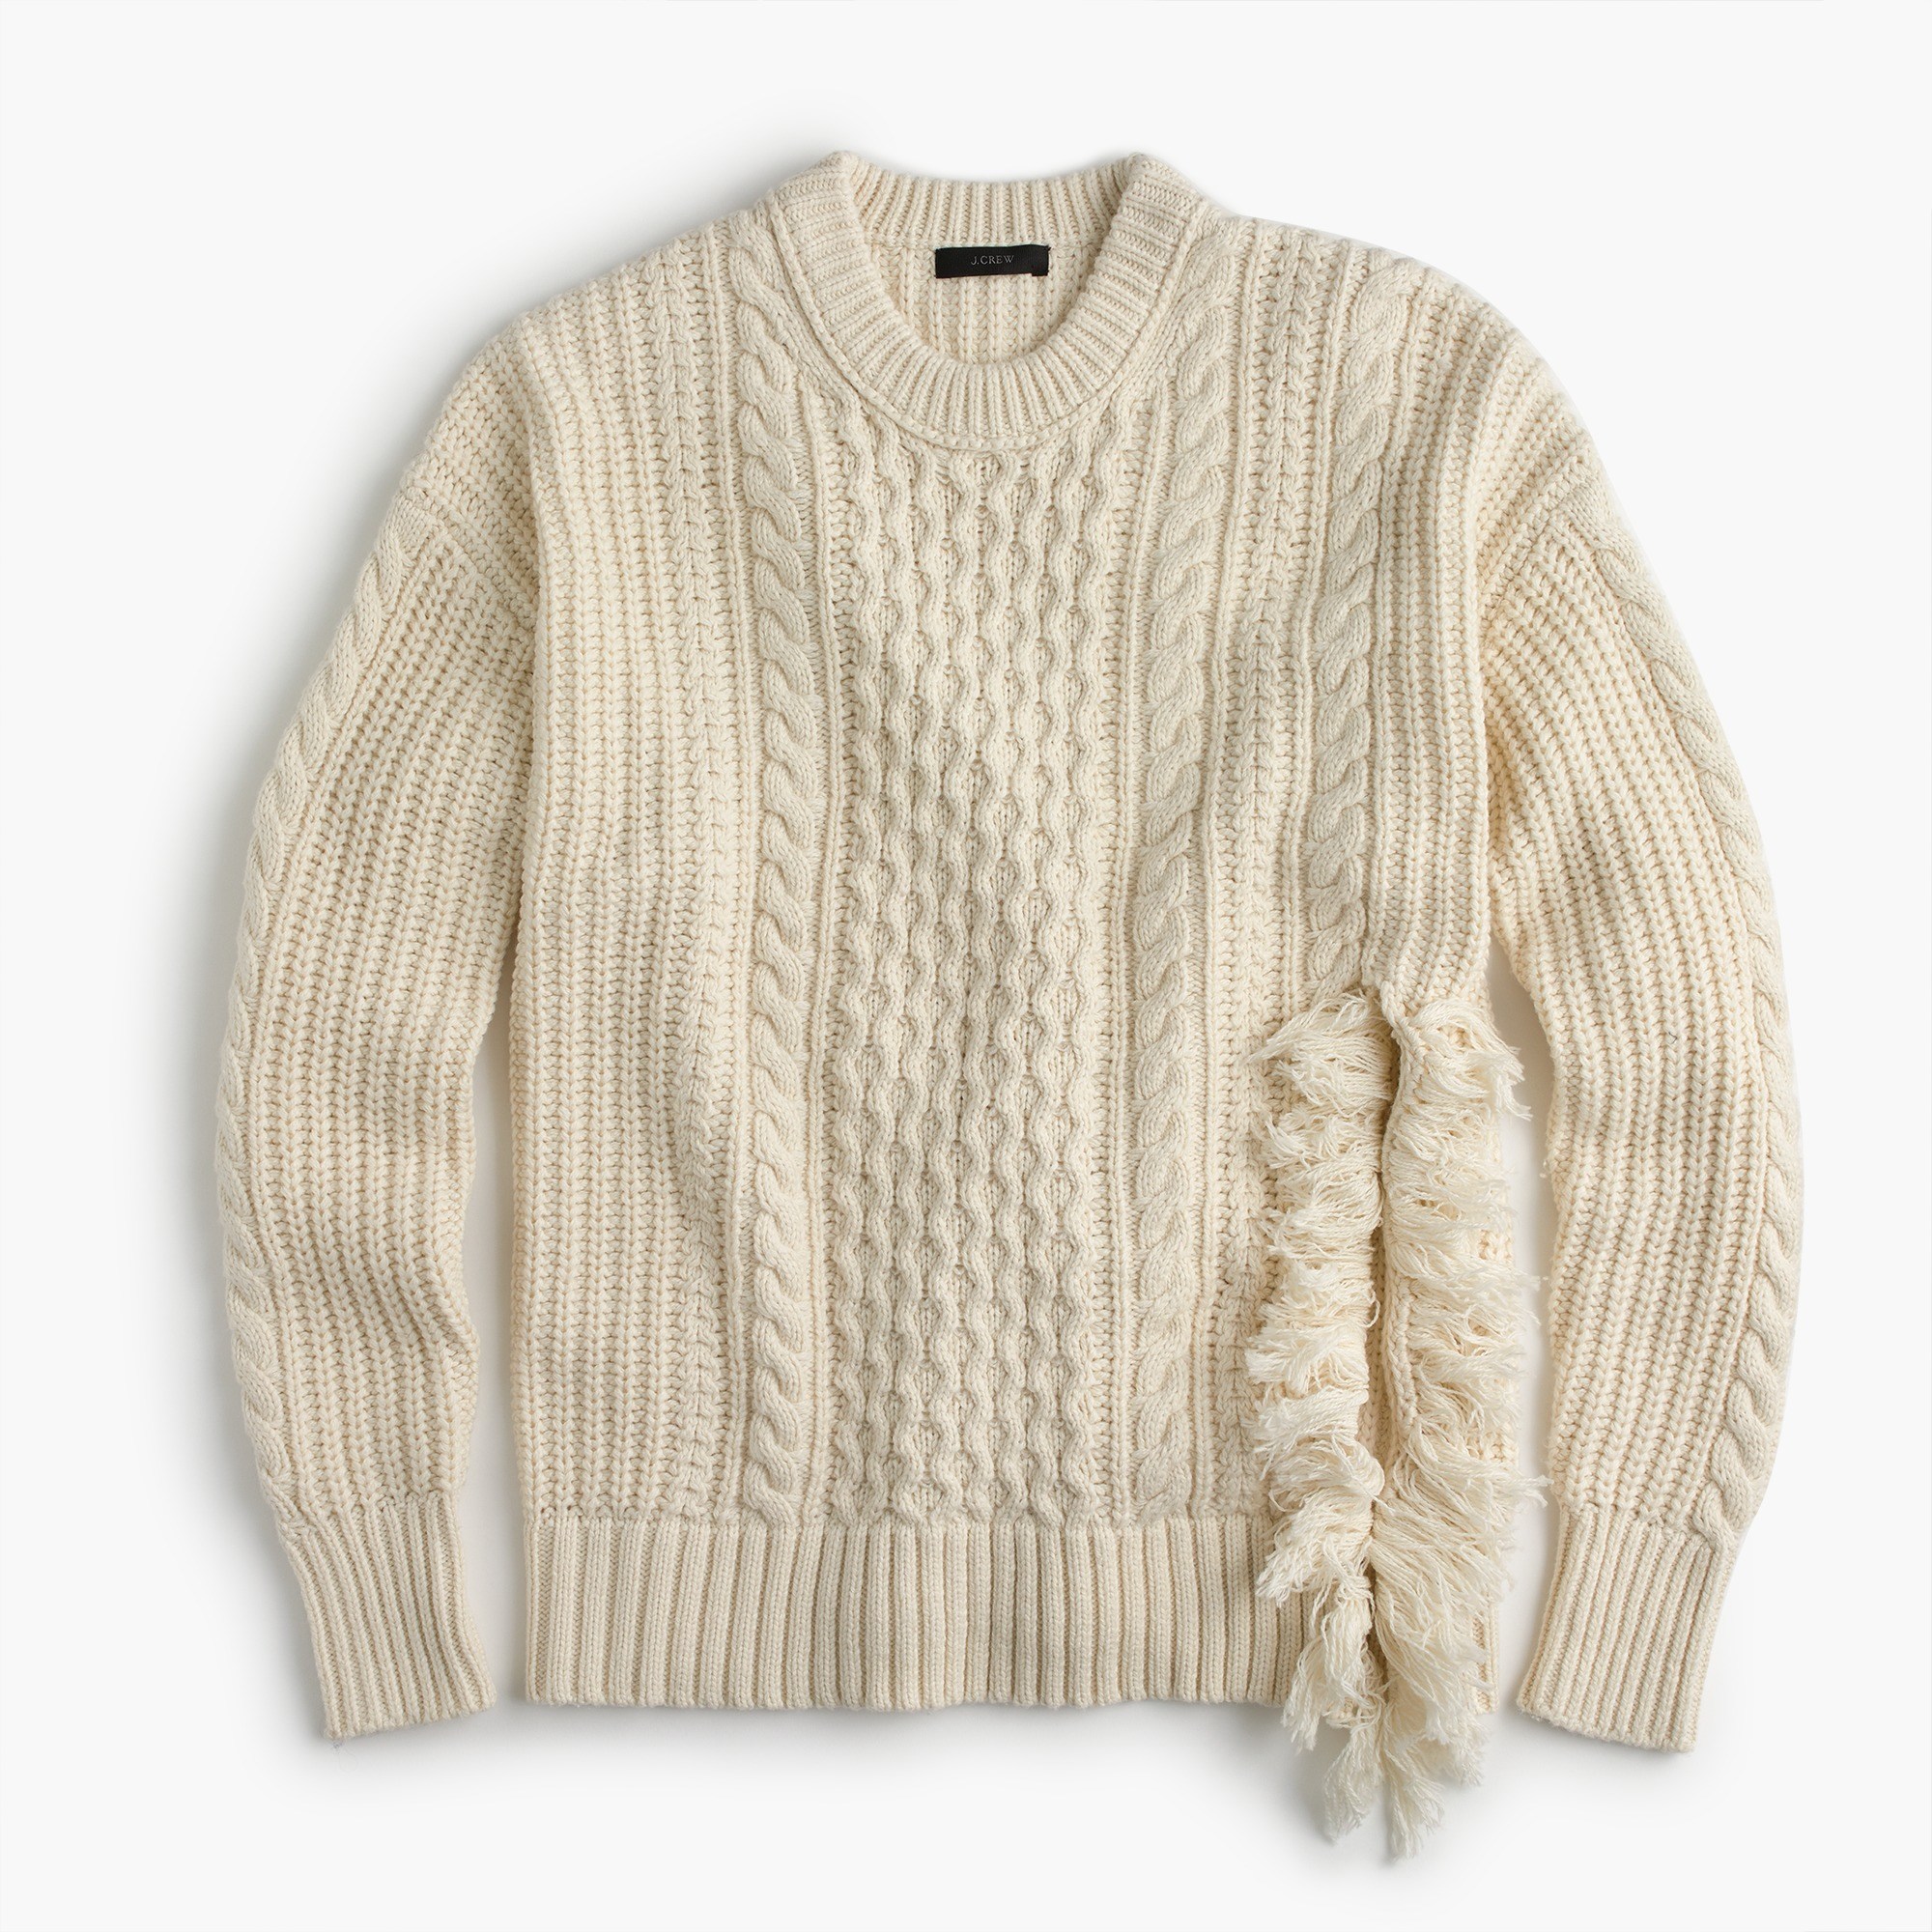 Cable Knit Sweater cableknit sweater with fringe : women pullovers IYRCZRQ